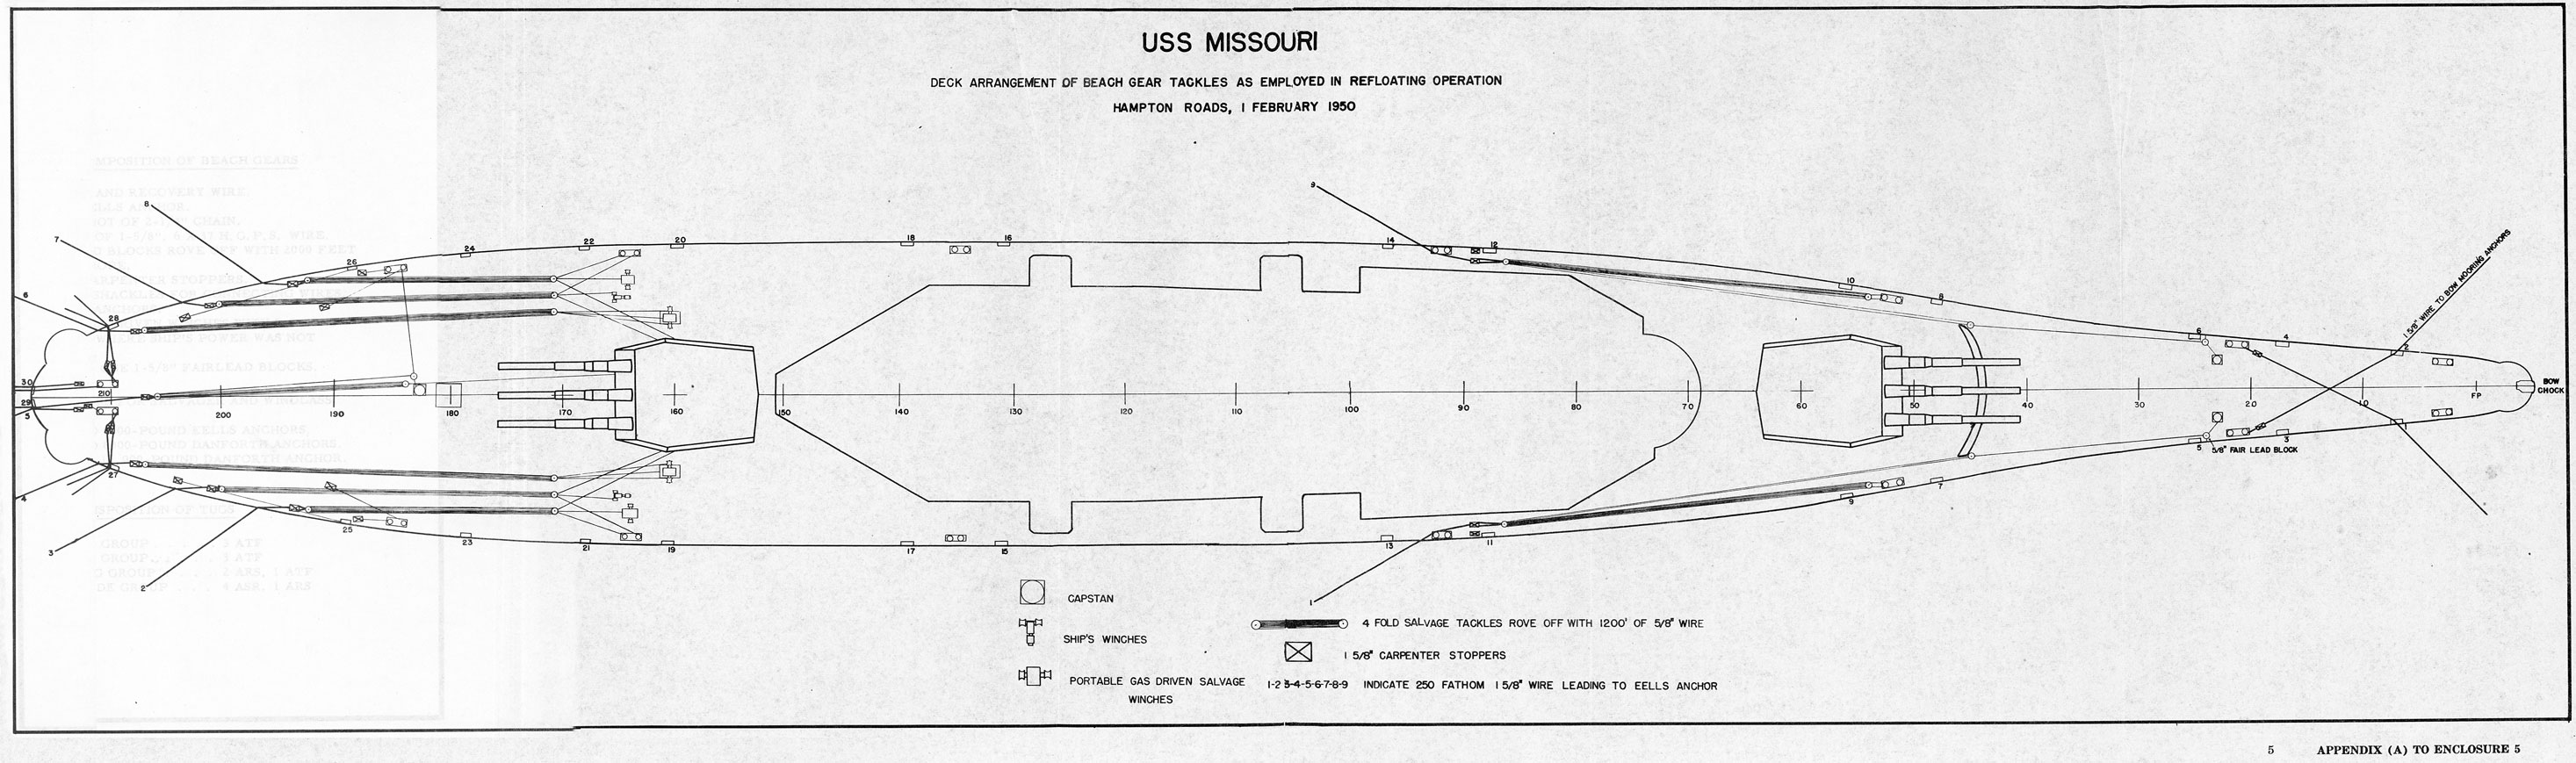 
Page 5.
USS MISSOURI
Deck Arrangement of Beach Gear Tackles As Employed in Refloating Operation
Hampton Roads, 1 February 1950
5 Appending (A) To Enclosure 5
(Large image is on separate page.)